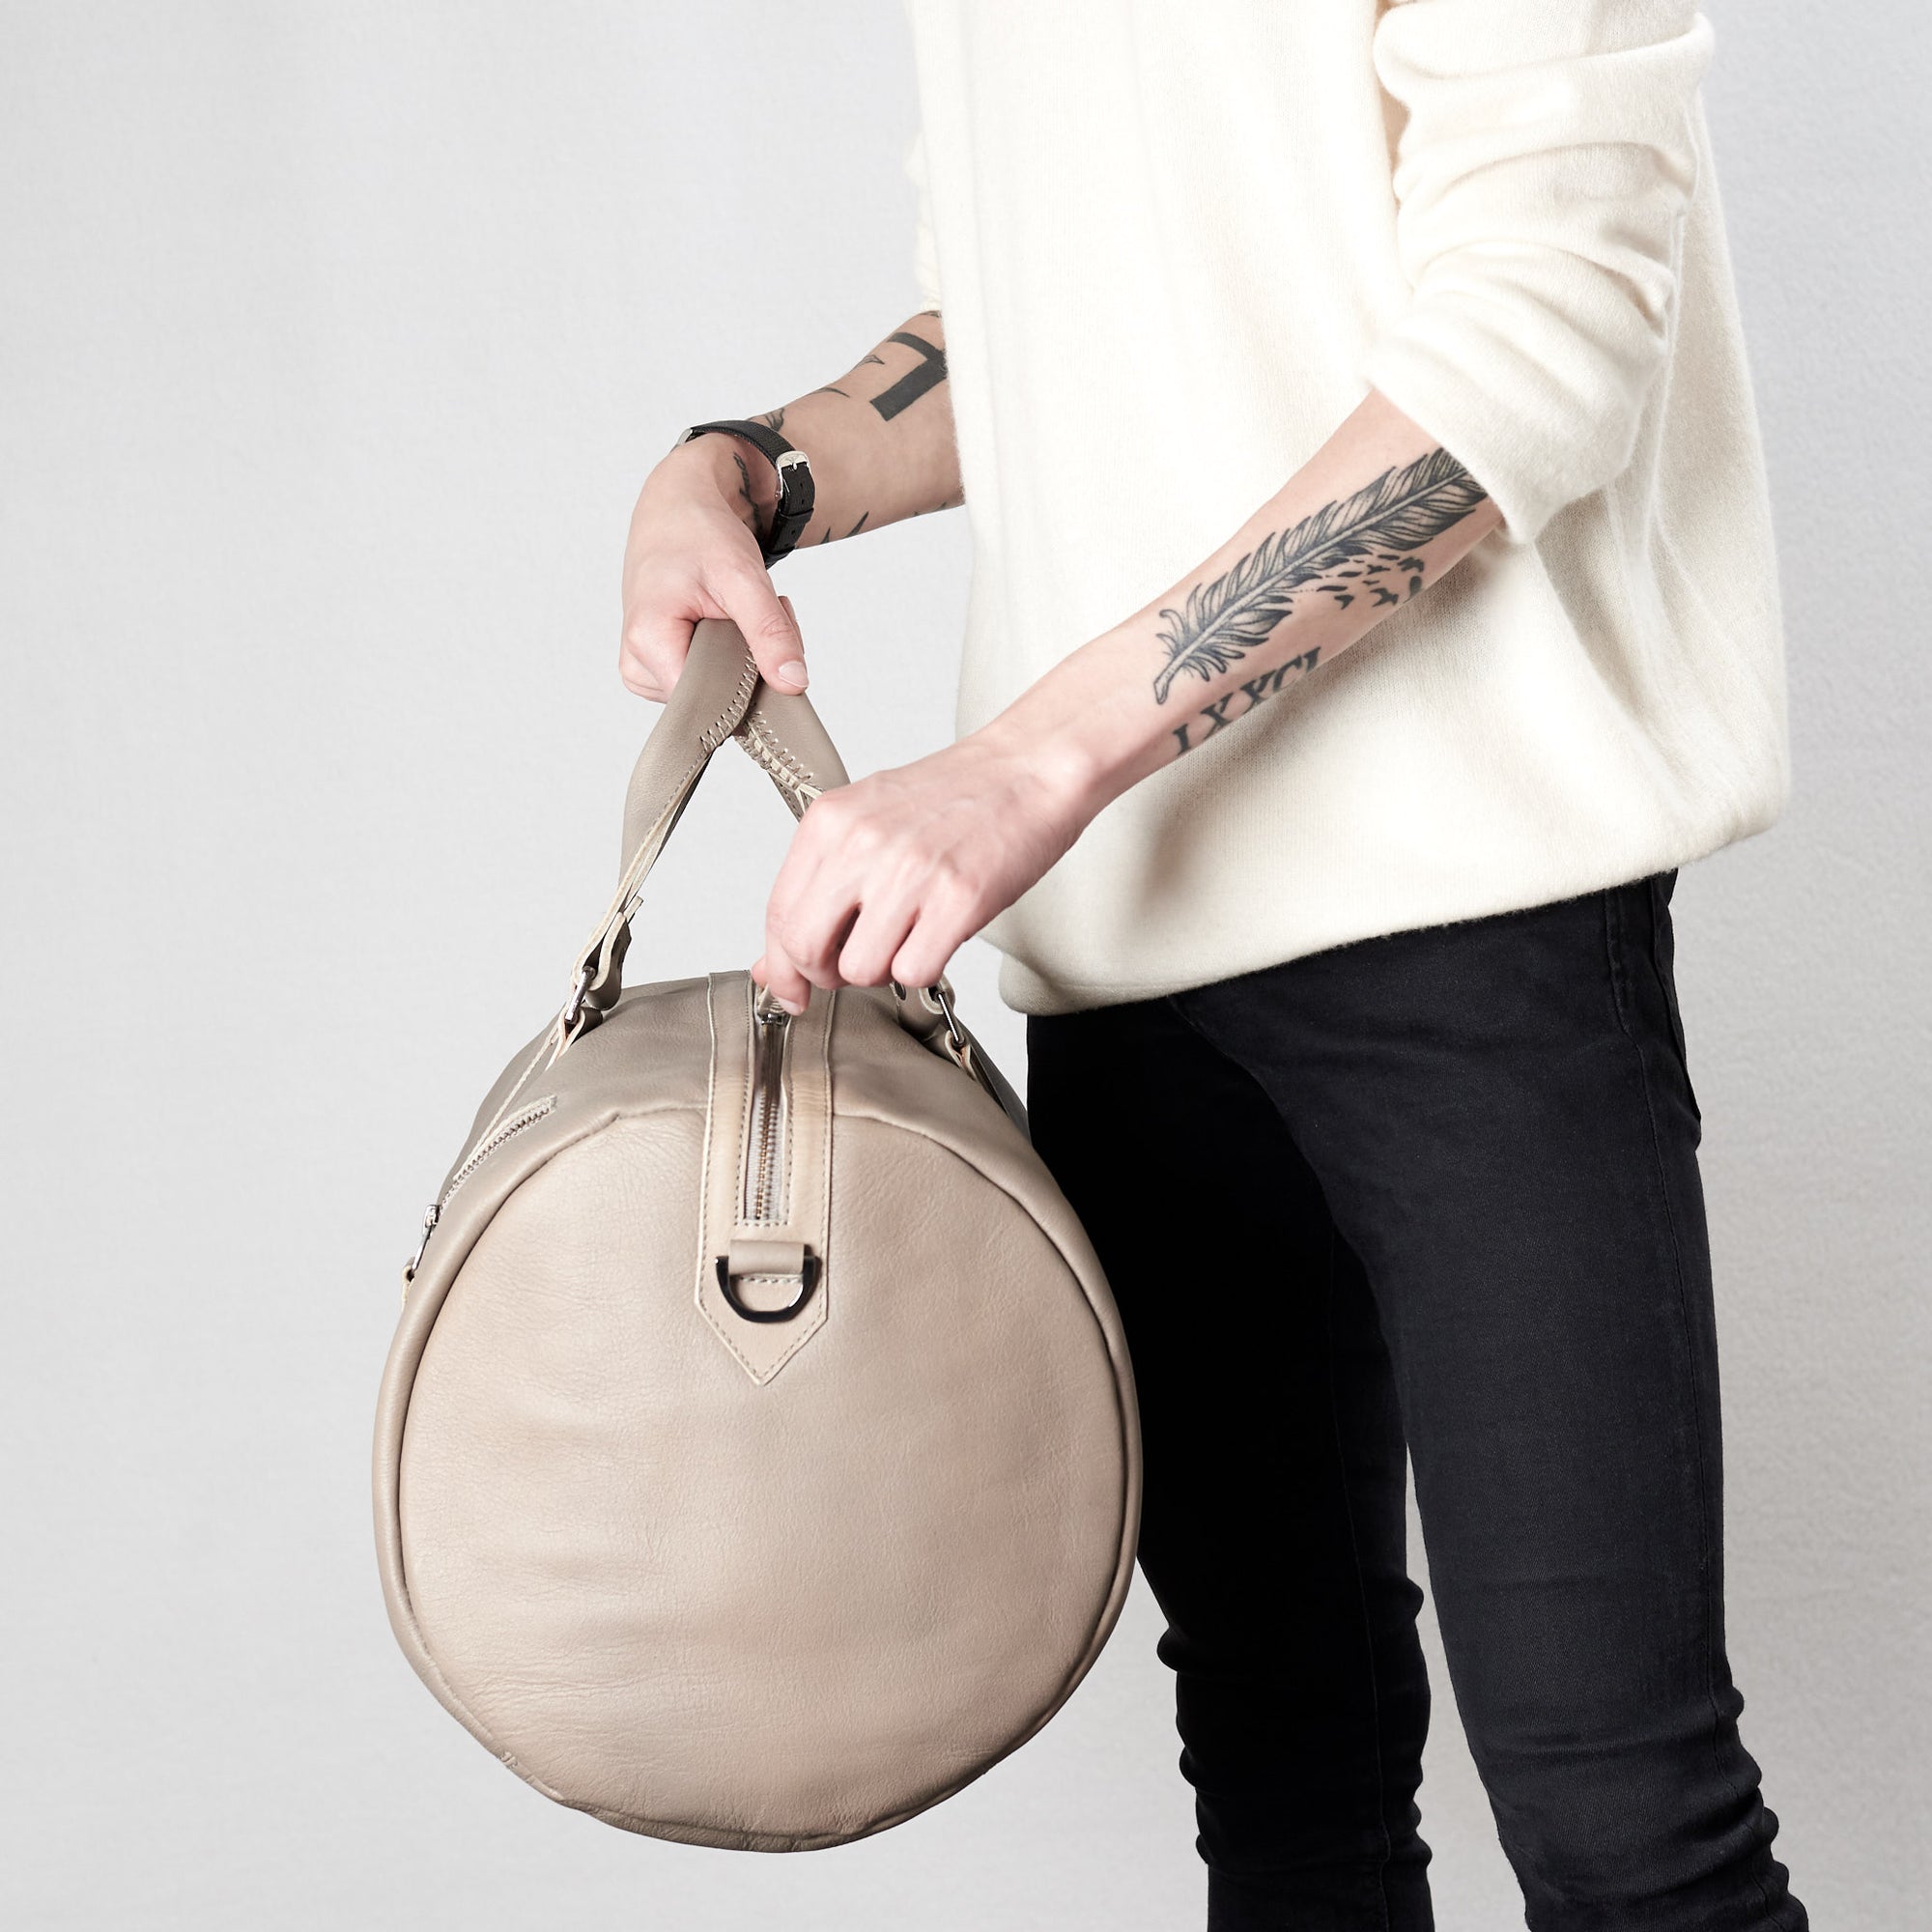 Style zipper tabs. Substantial grey duffle bag by Capra Leather. 